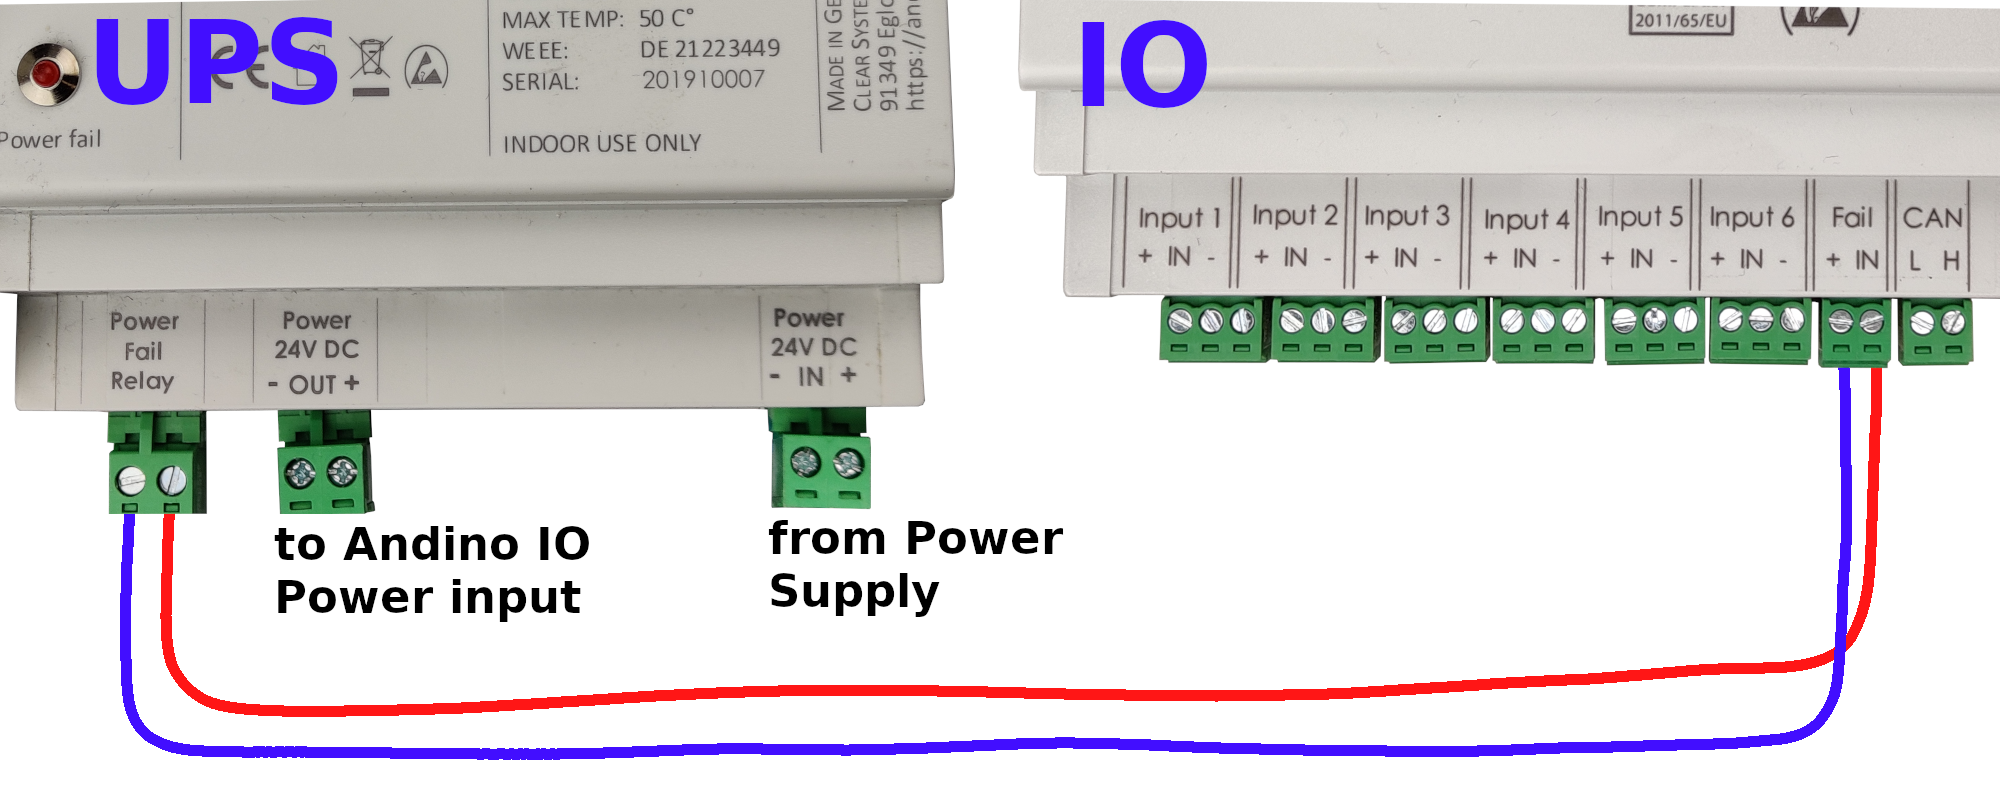 Connecting the Power Fail Relay to the Power Fail Input